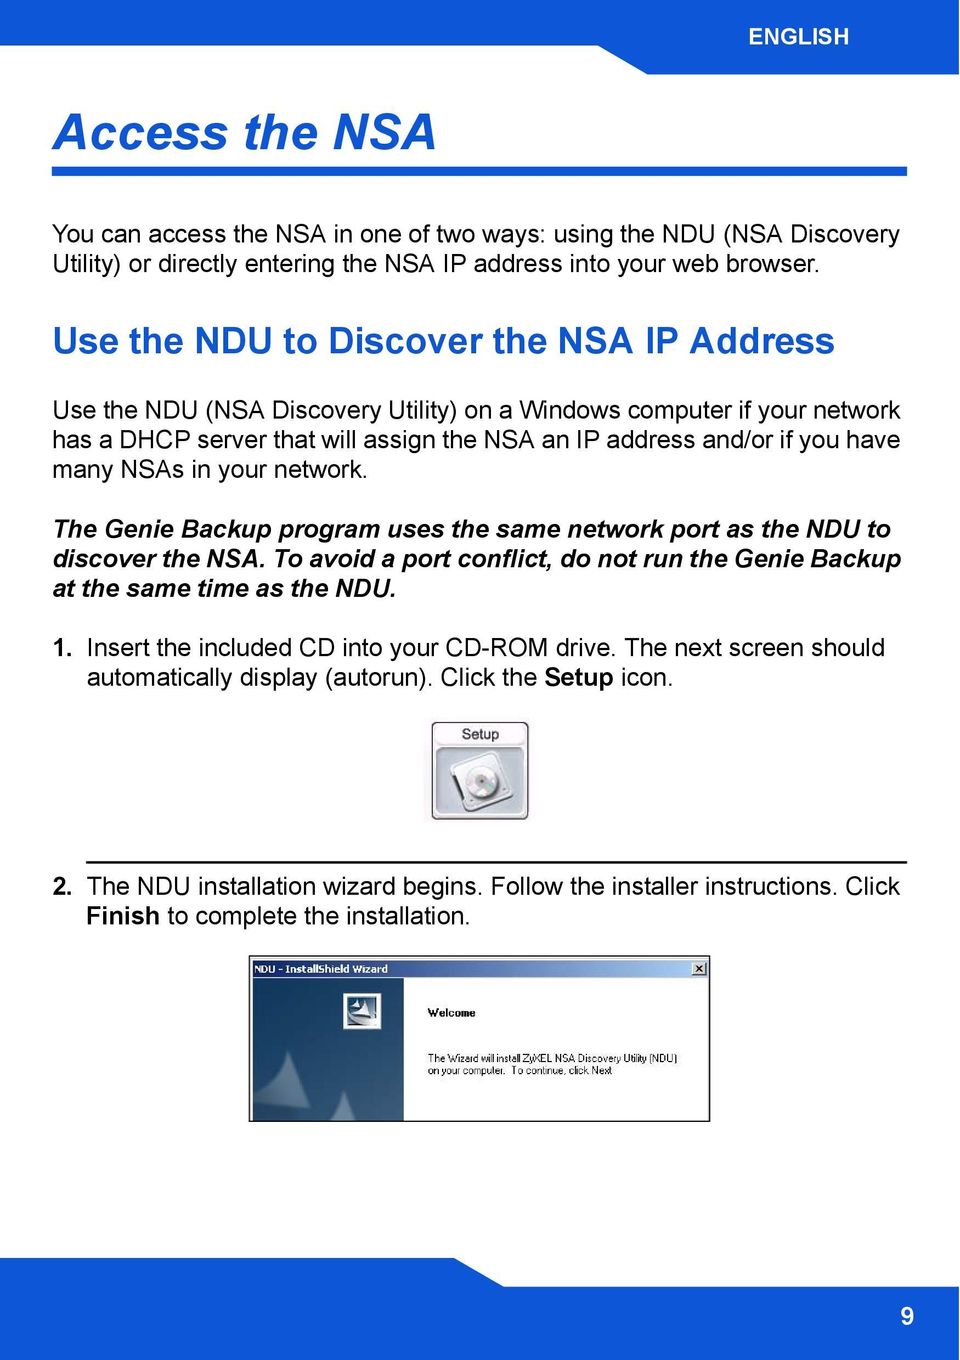 NSAs in your network. The Genie Backup program uses the same network port as the NDU to discover the NSA. To avoid a port conflict, do not run the Genie Backup at the same time as the NDU. 1.